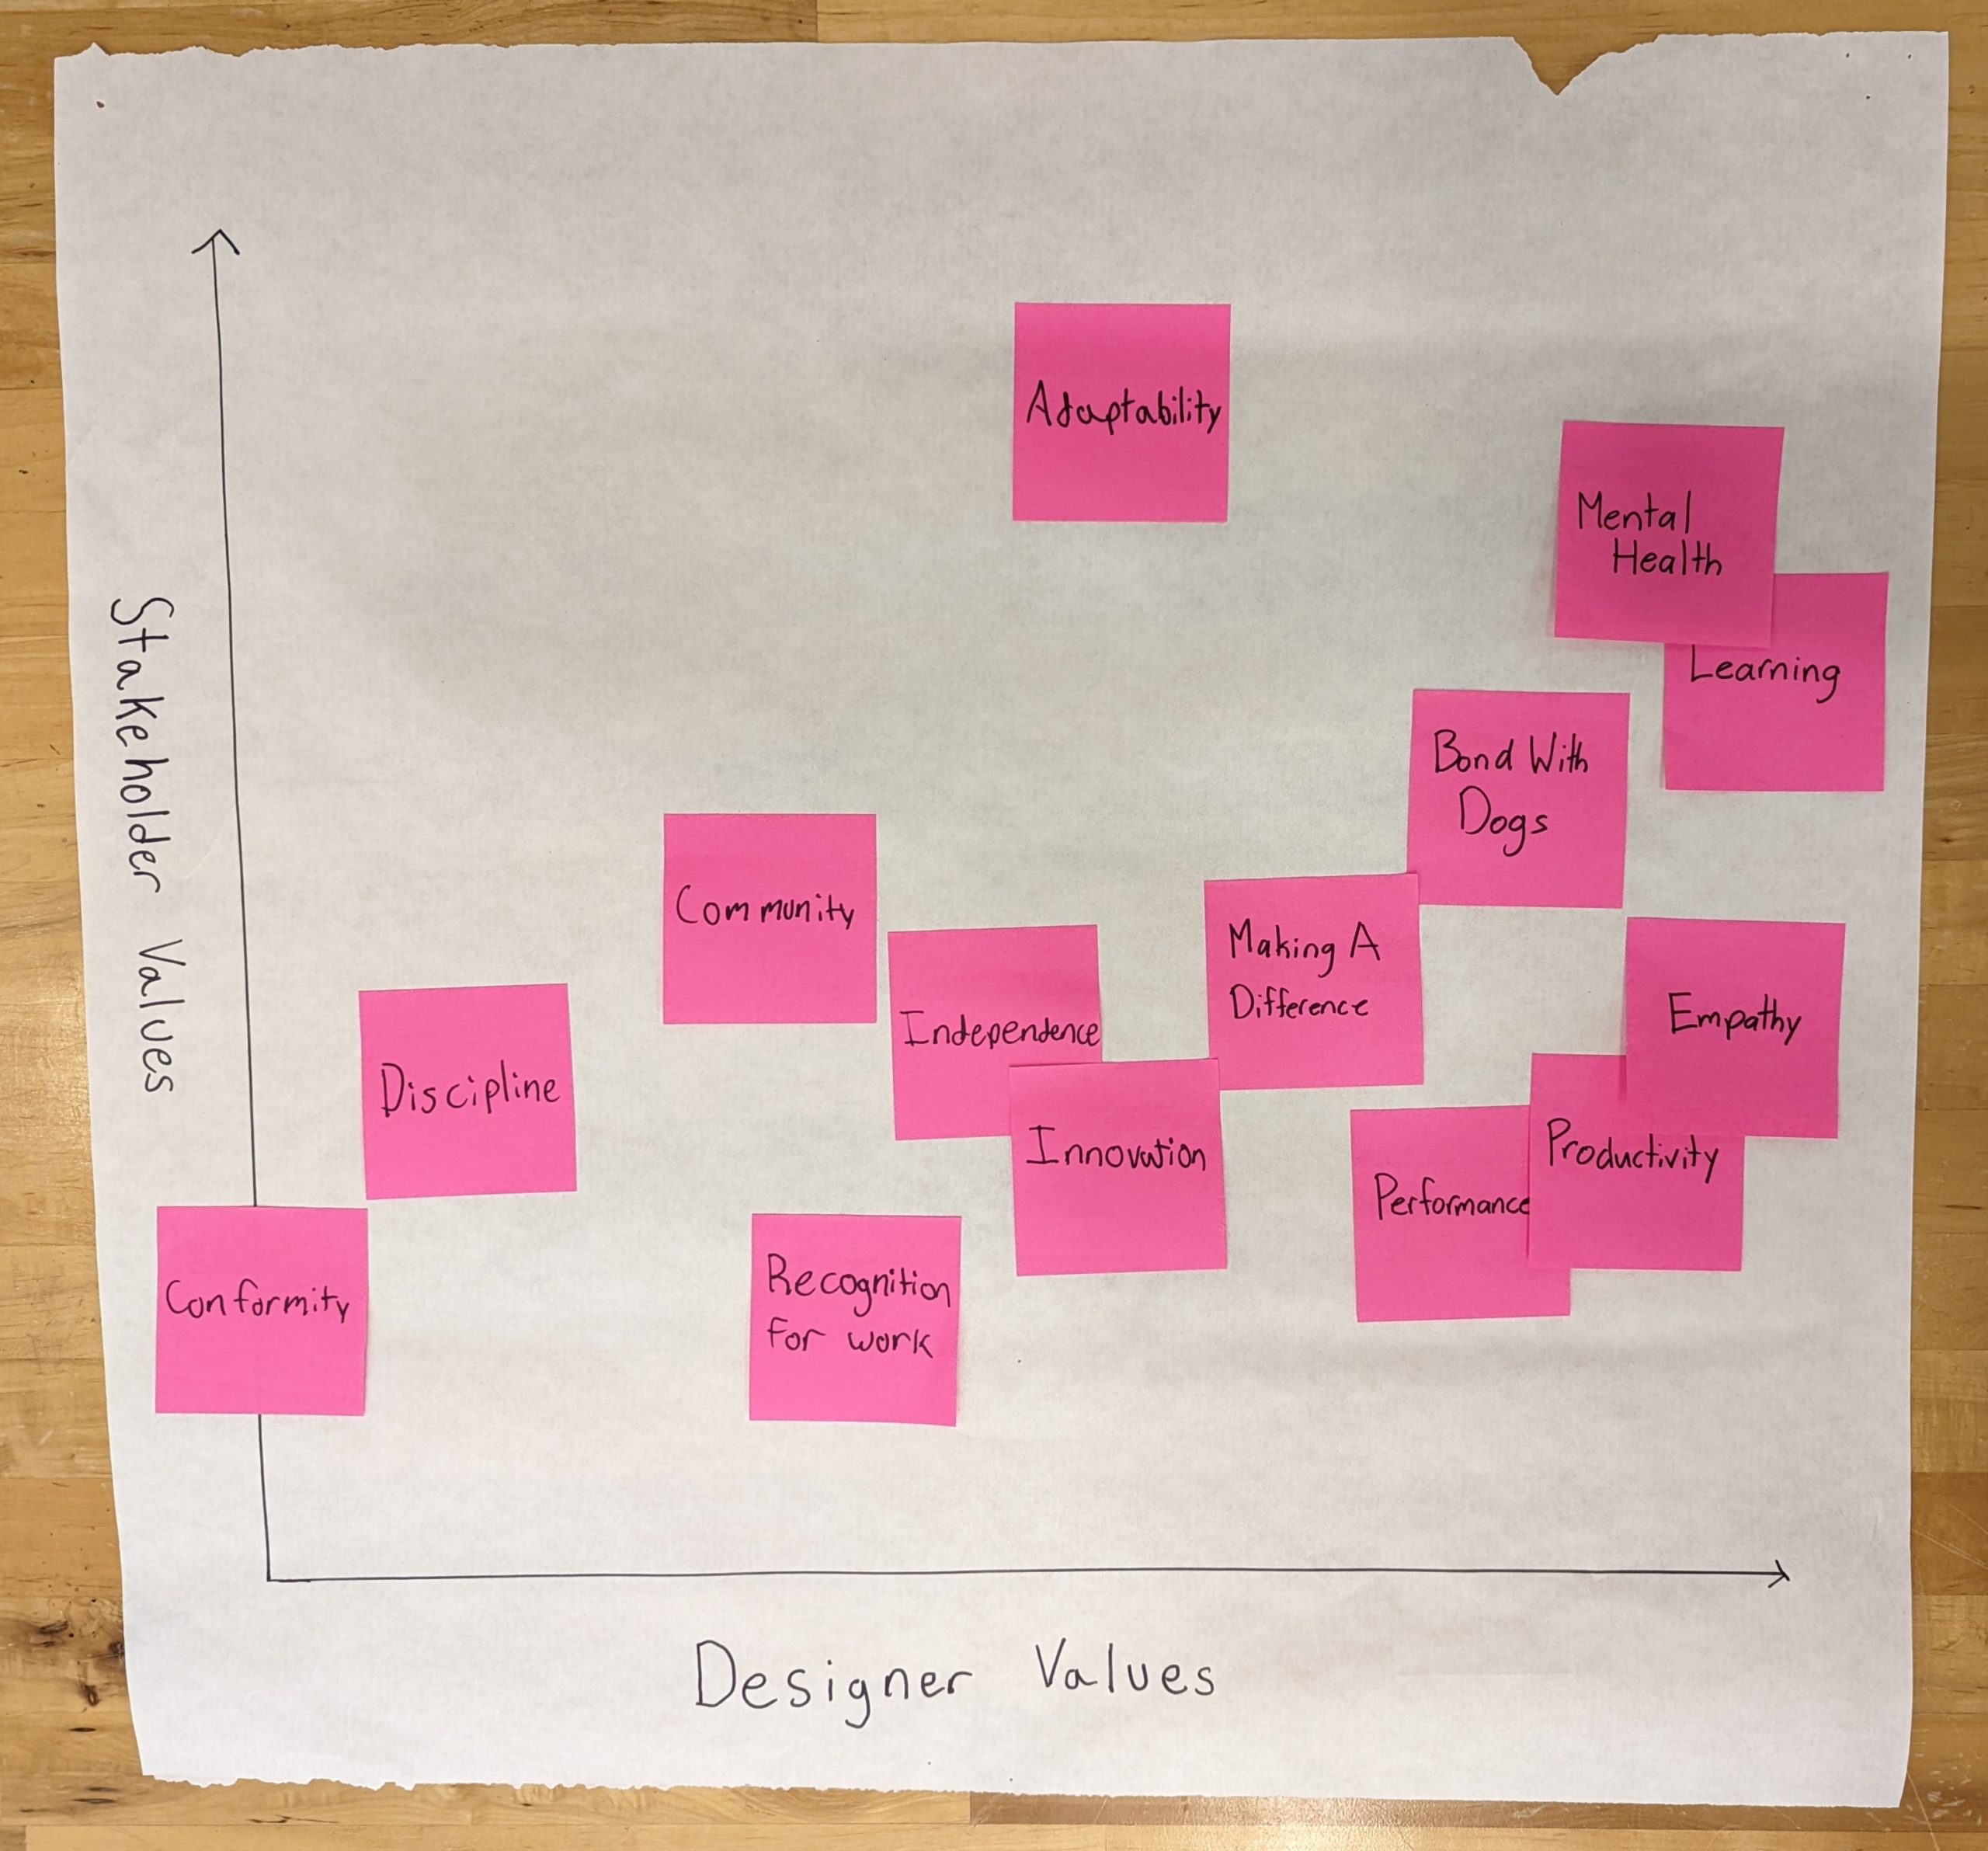 Plot of pink sticky notes showing stakeholder values versus design values